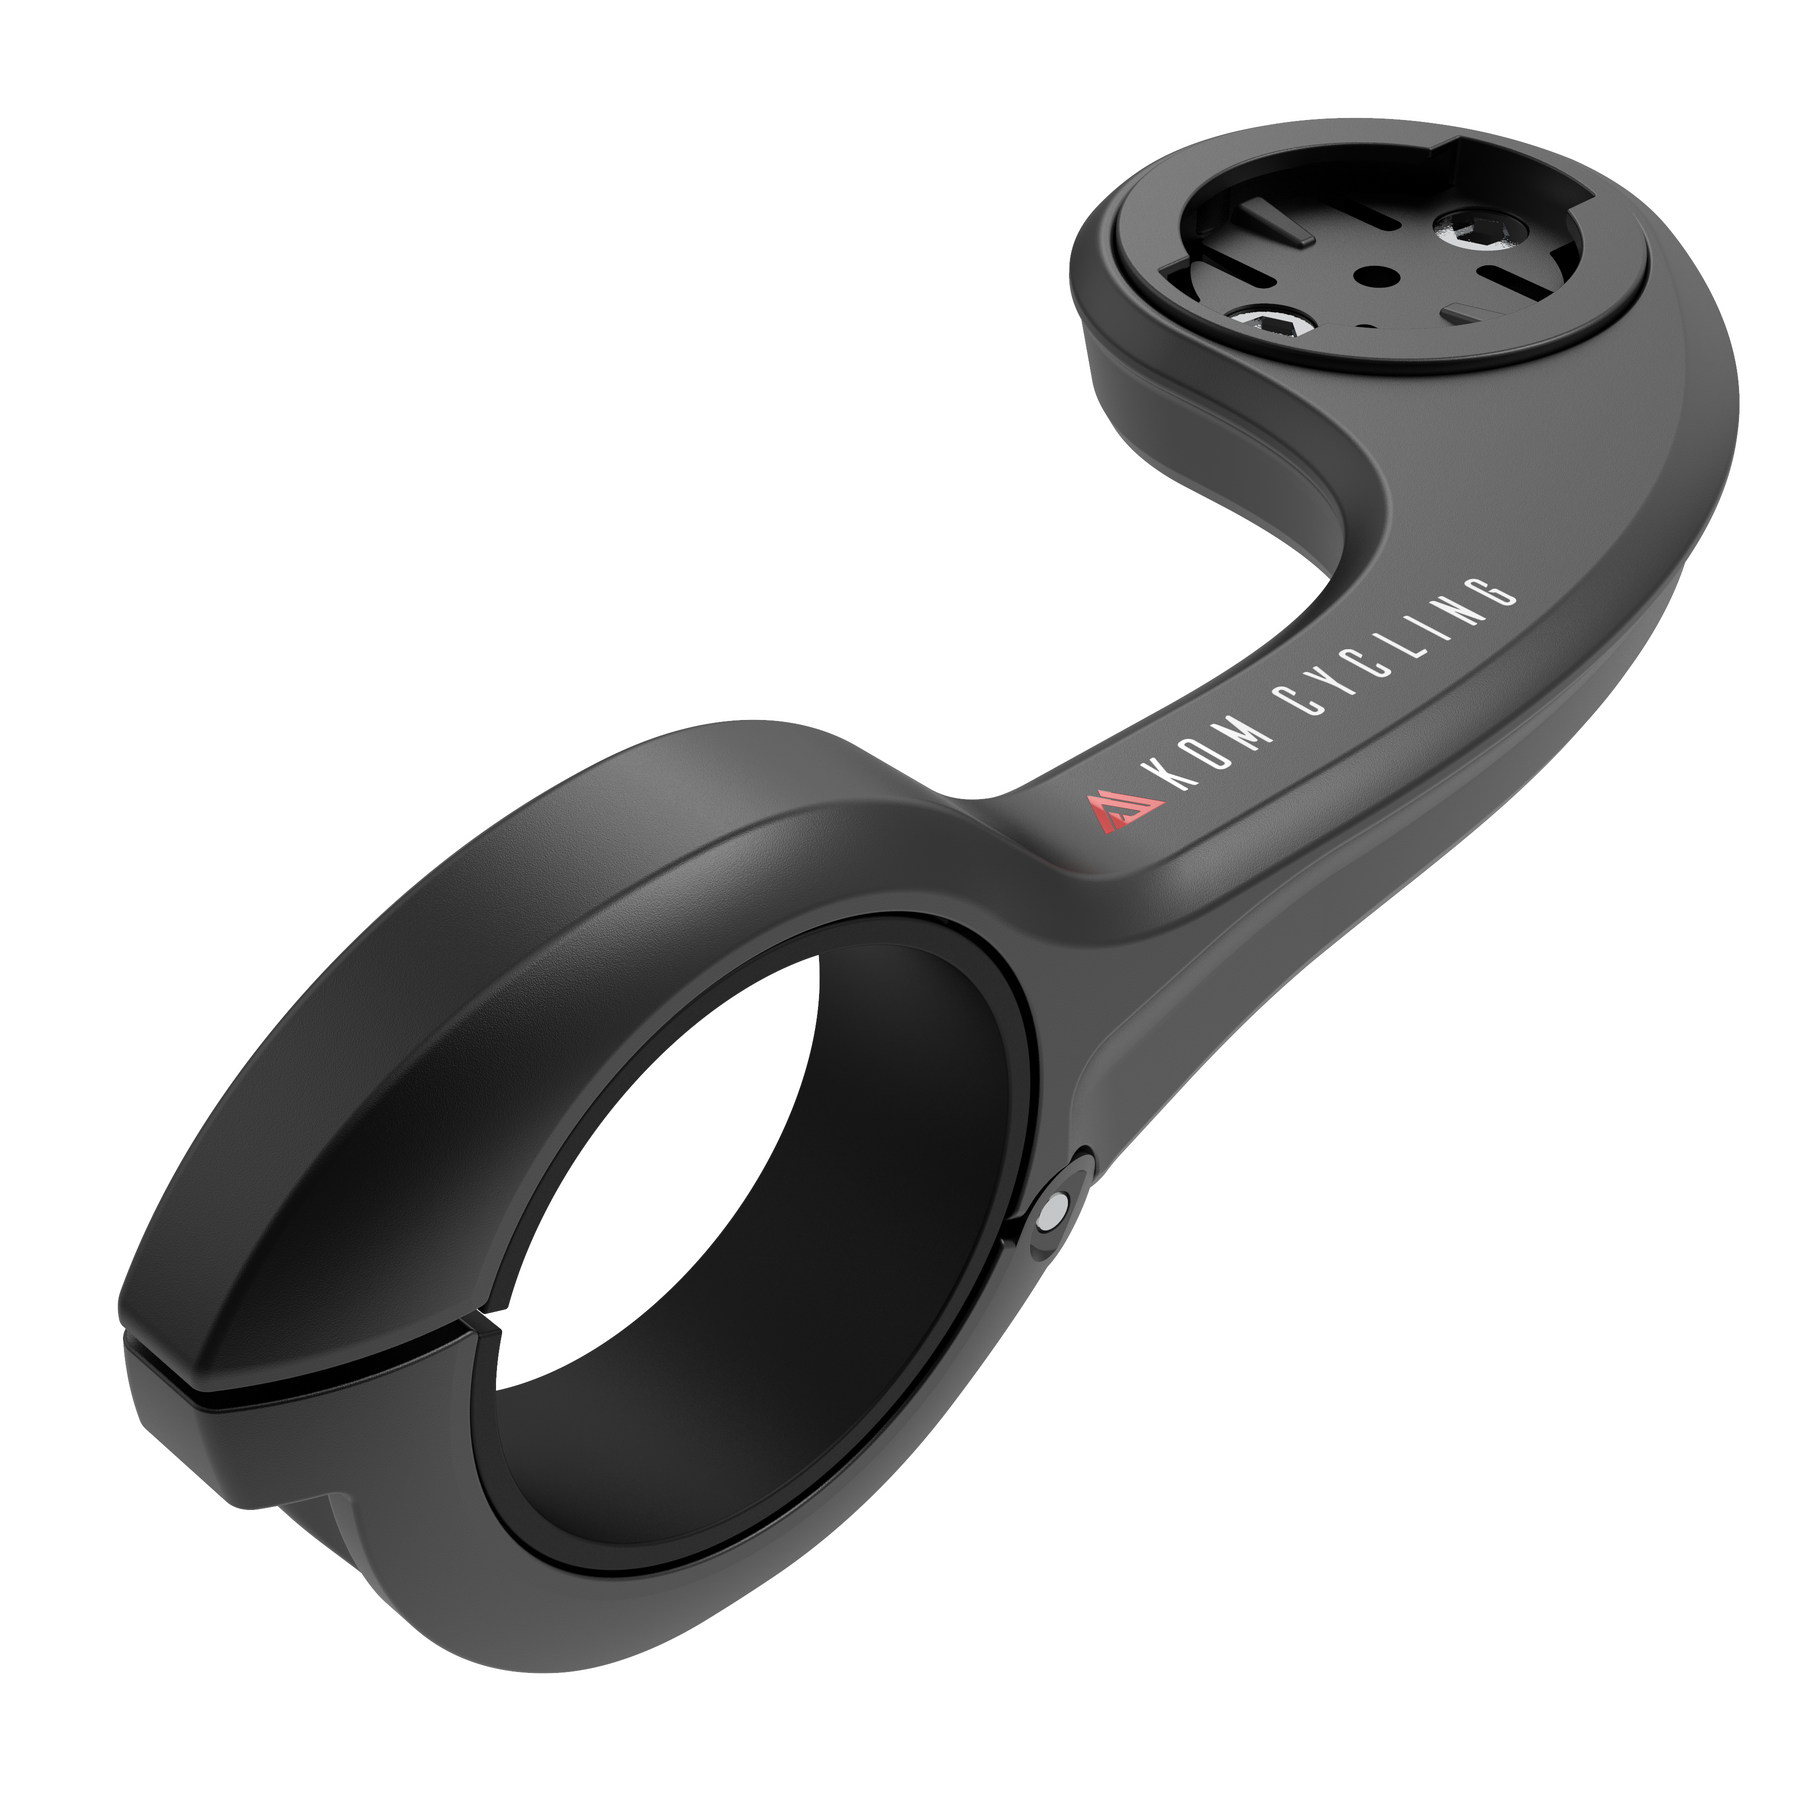  KOM Cycling Garmin Bike Mount with Black Finish from Garmin Edge  Mount Designed for Garmin Edge 530 Plus and Other : Electronics